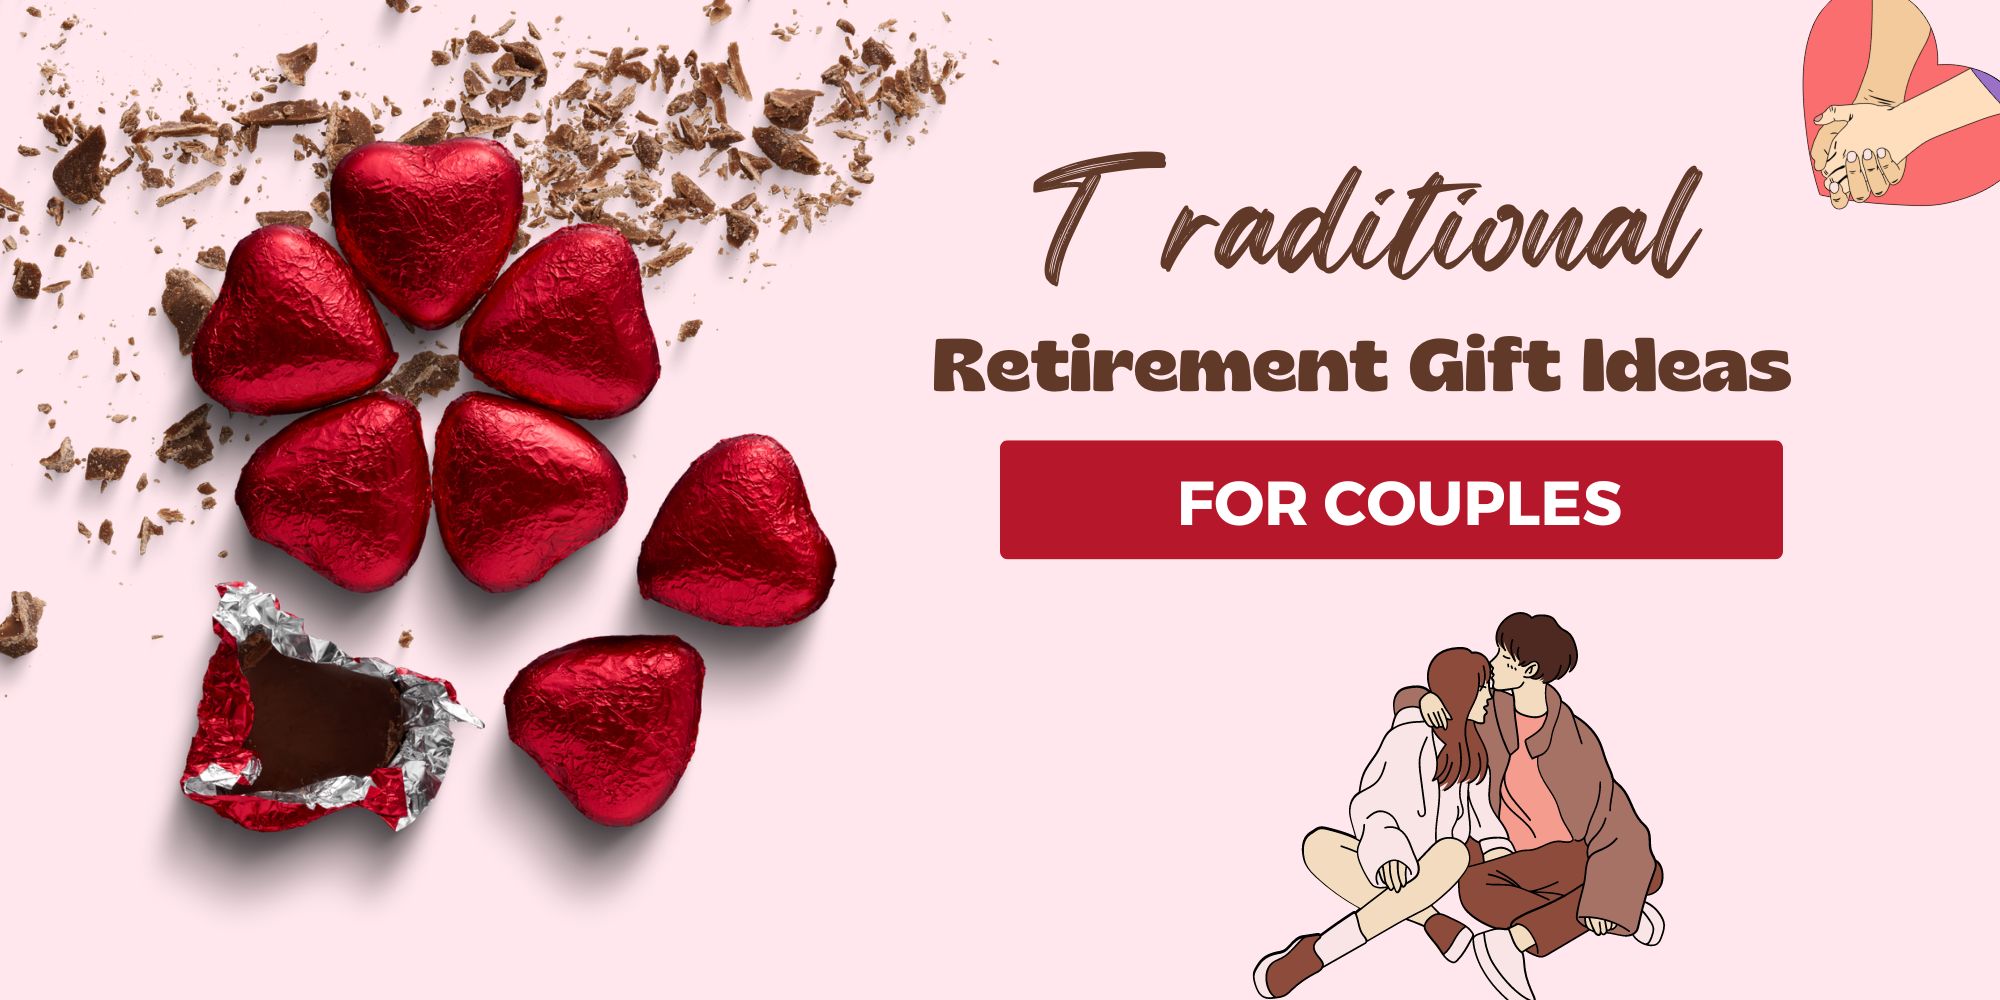 Traditional Retirement Gift Ideas for couples